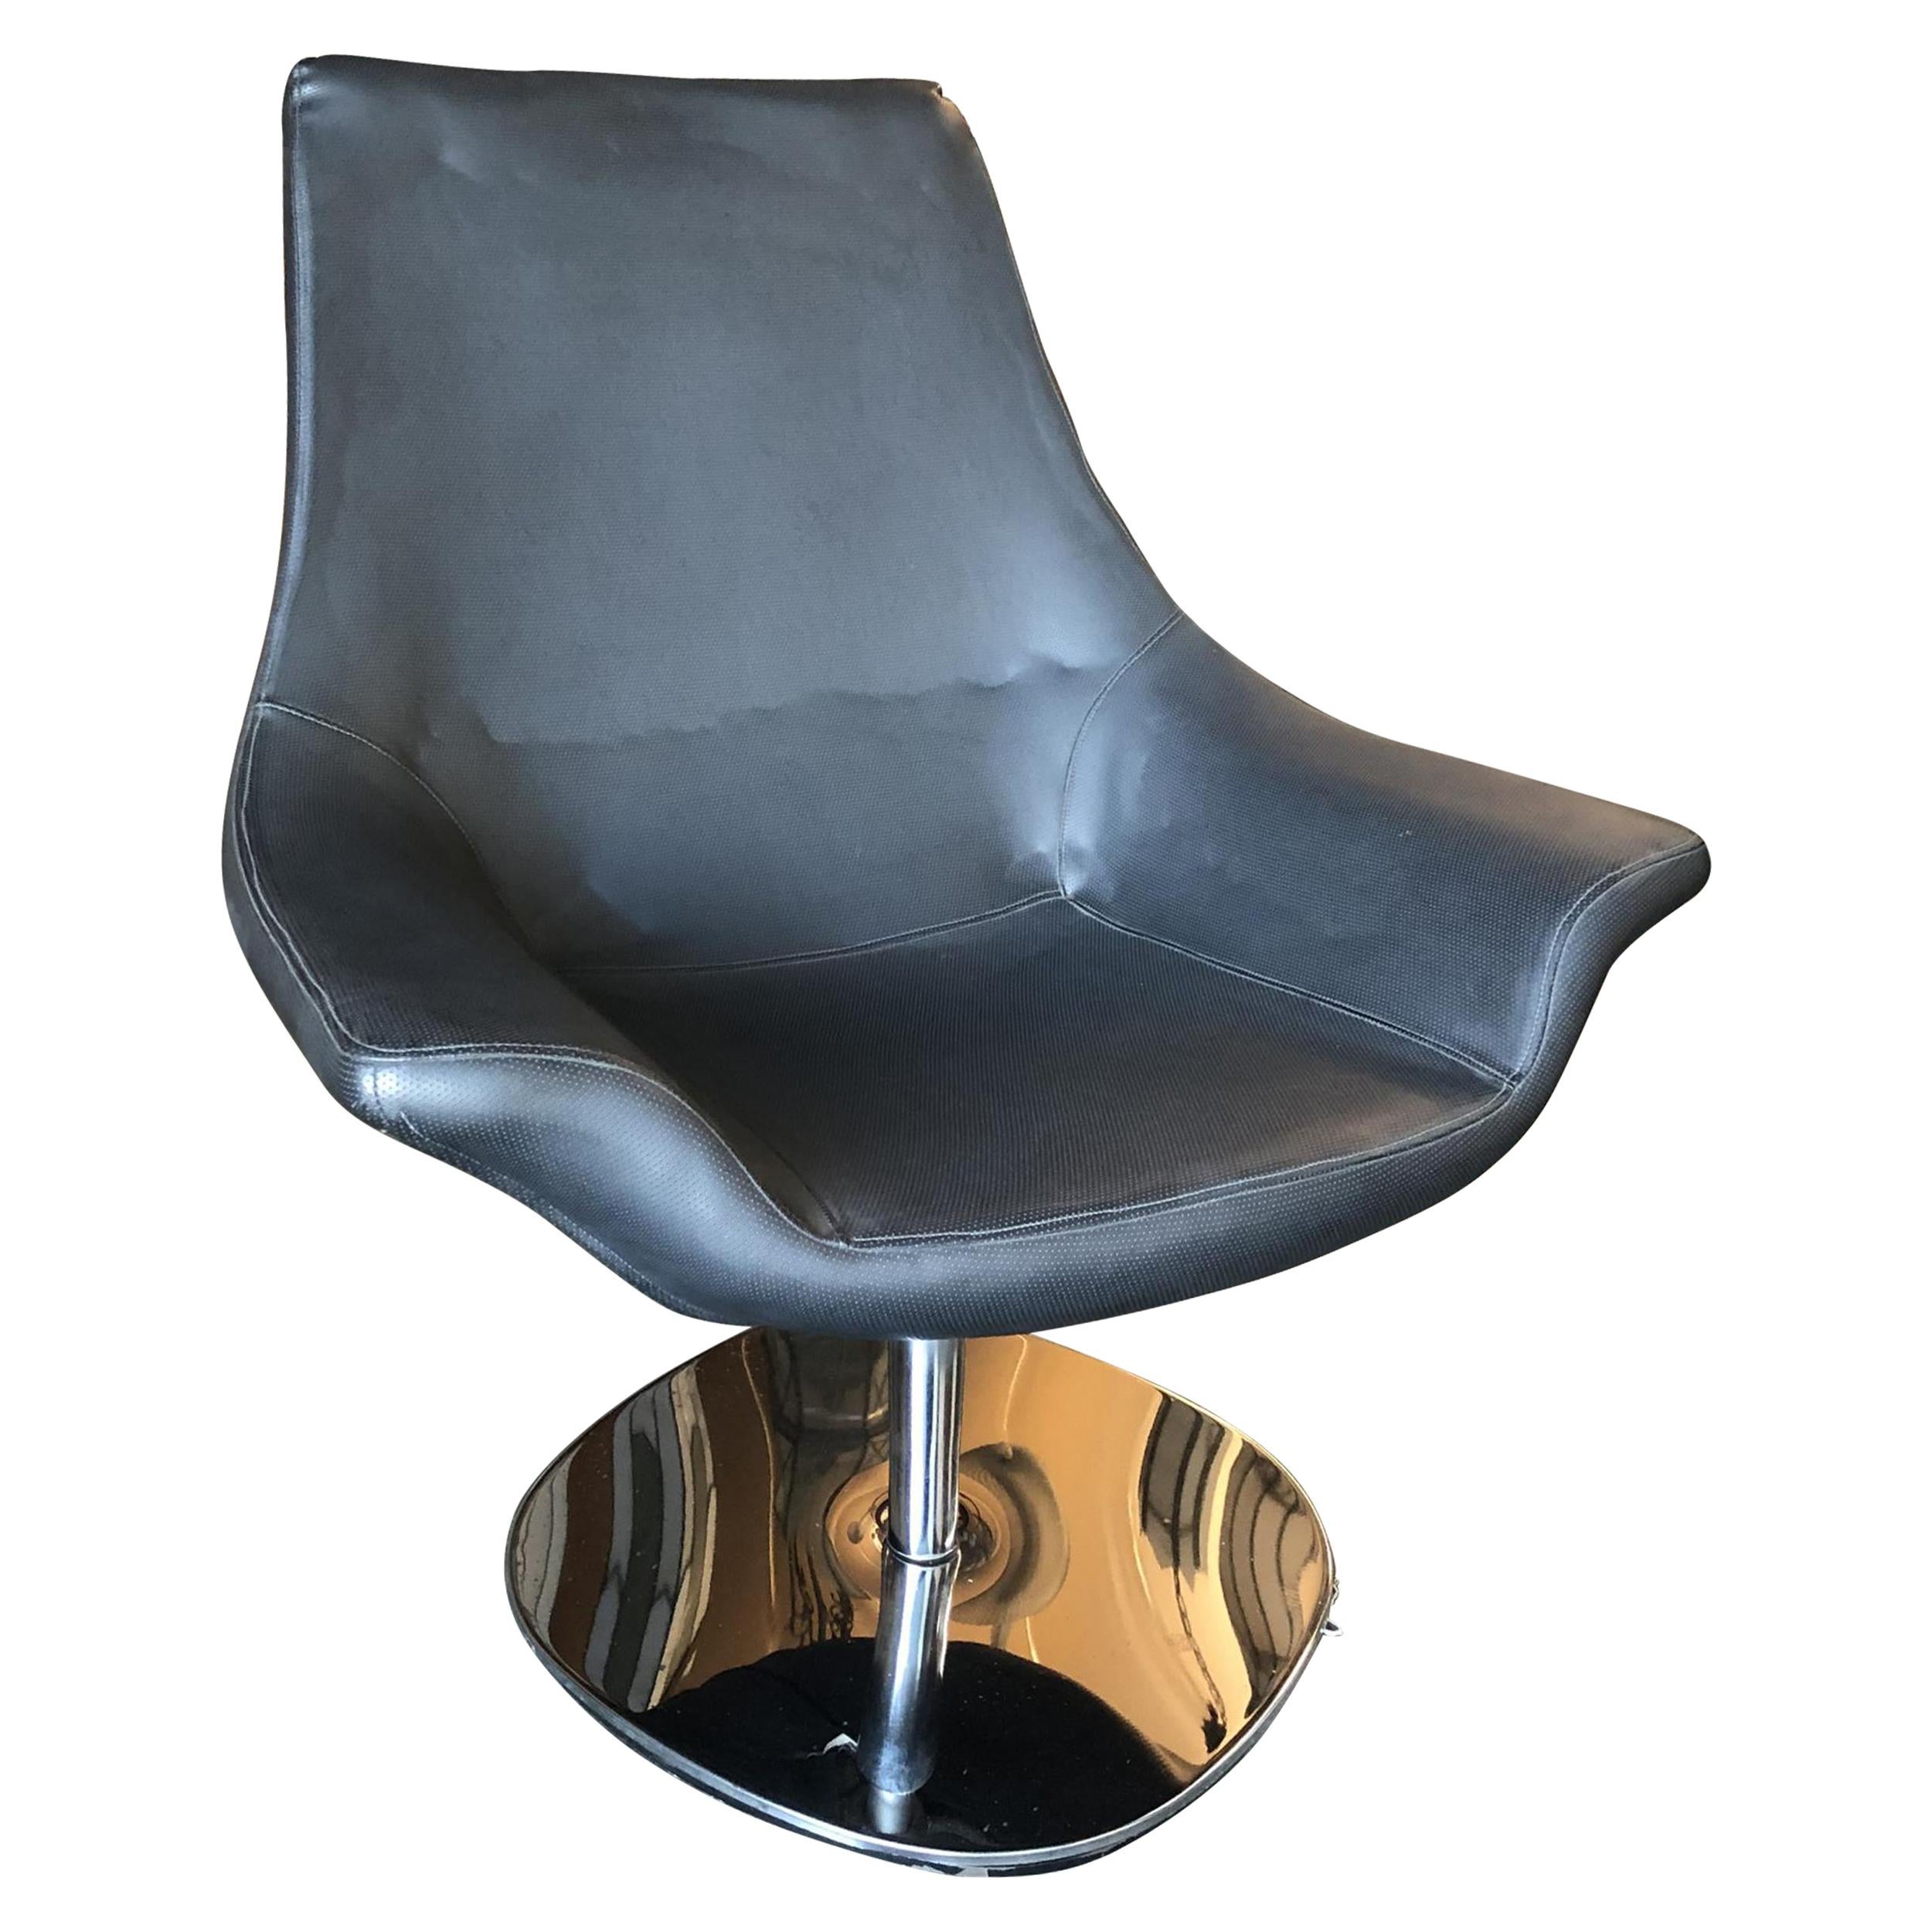 Modernist Leather Captian's Lounge Chair with Chrome Base, Circa 1980 For Sale